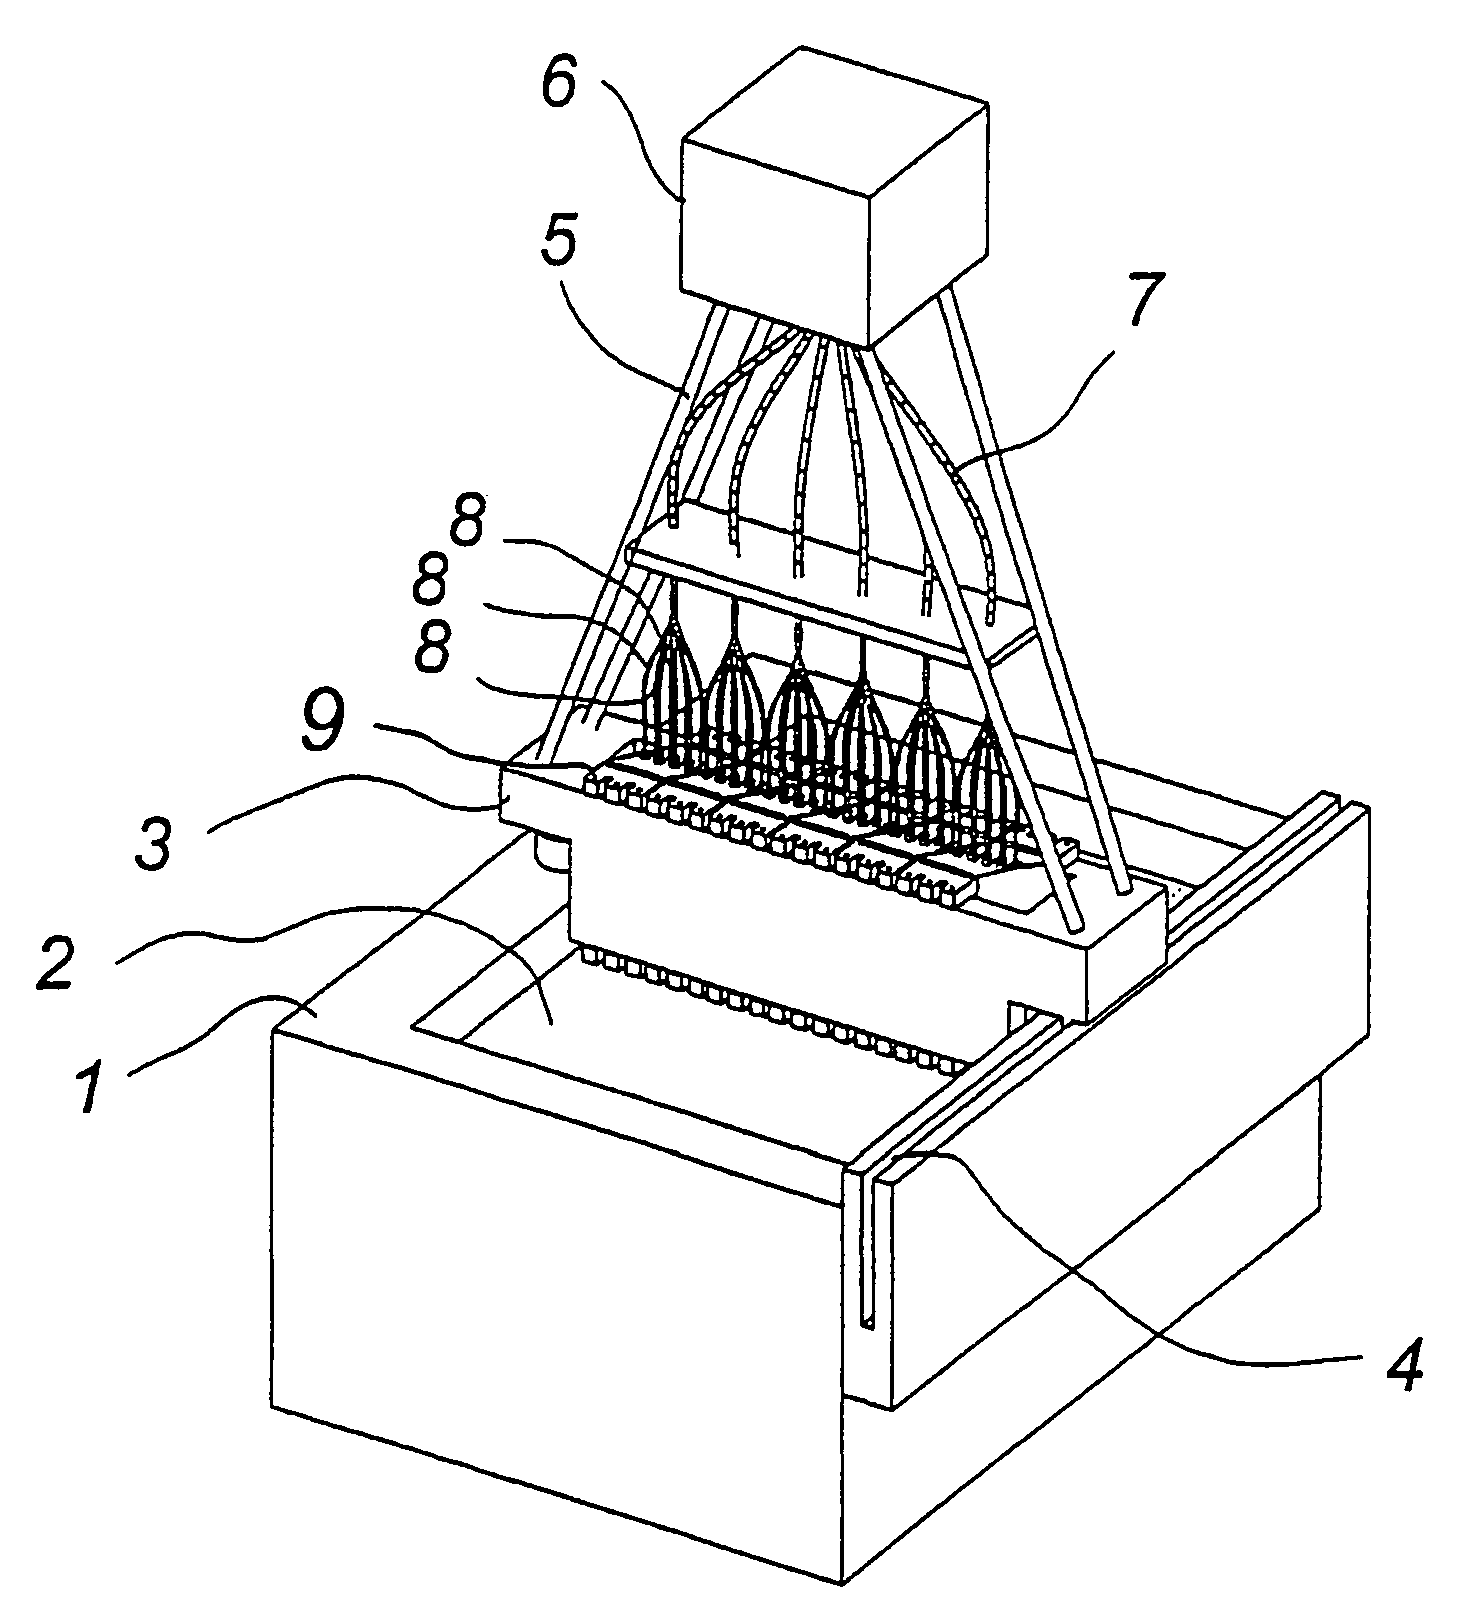 Rapid prototyping apparatus and method of rapid prototyping